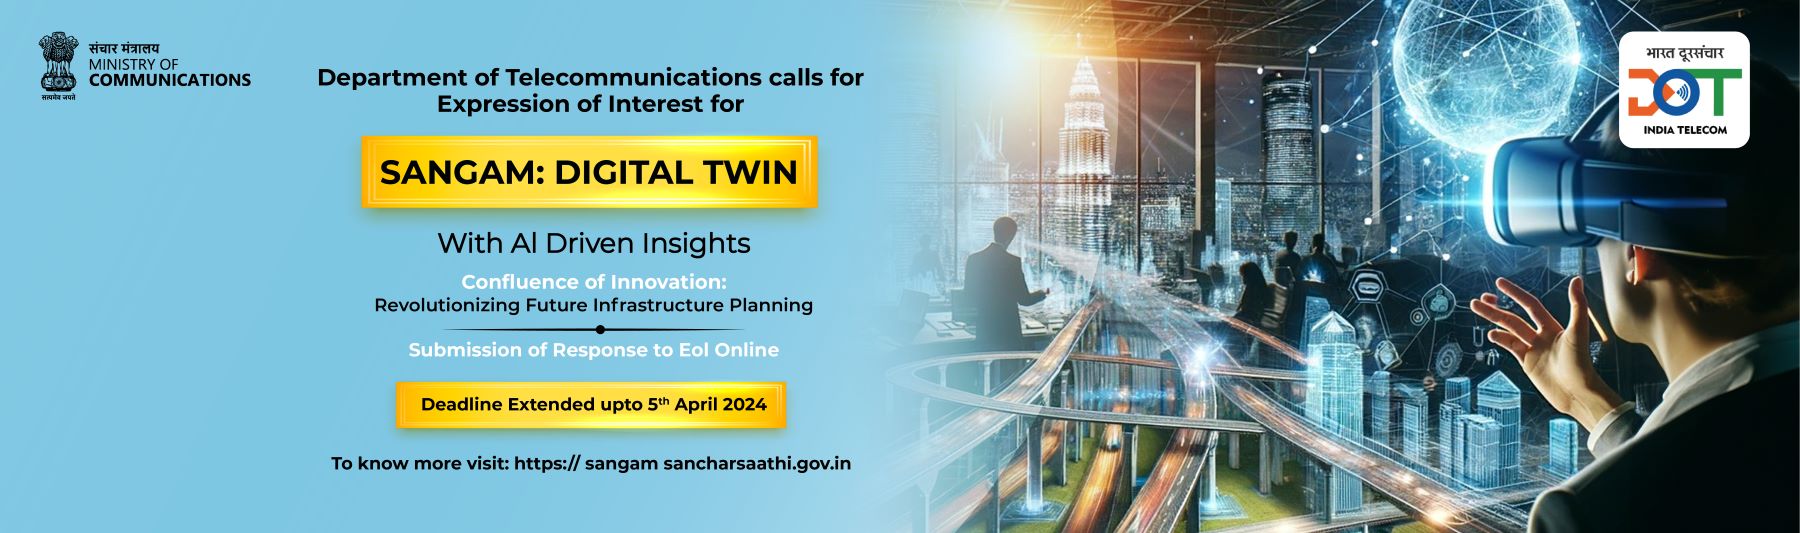 Extension of deadline for Sangam Digital Twin EoI submission